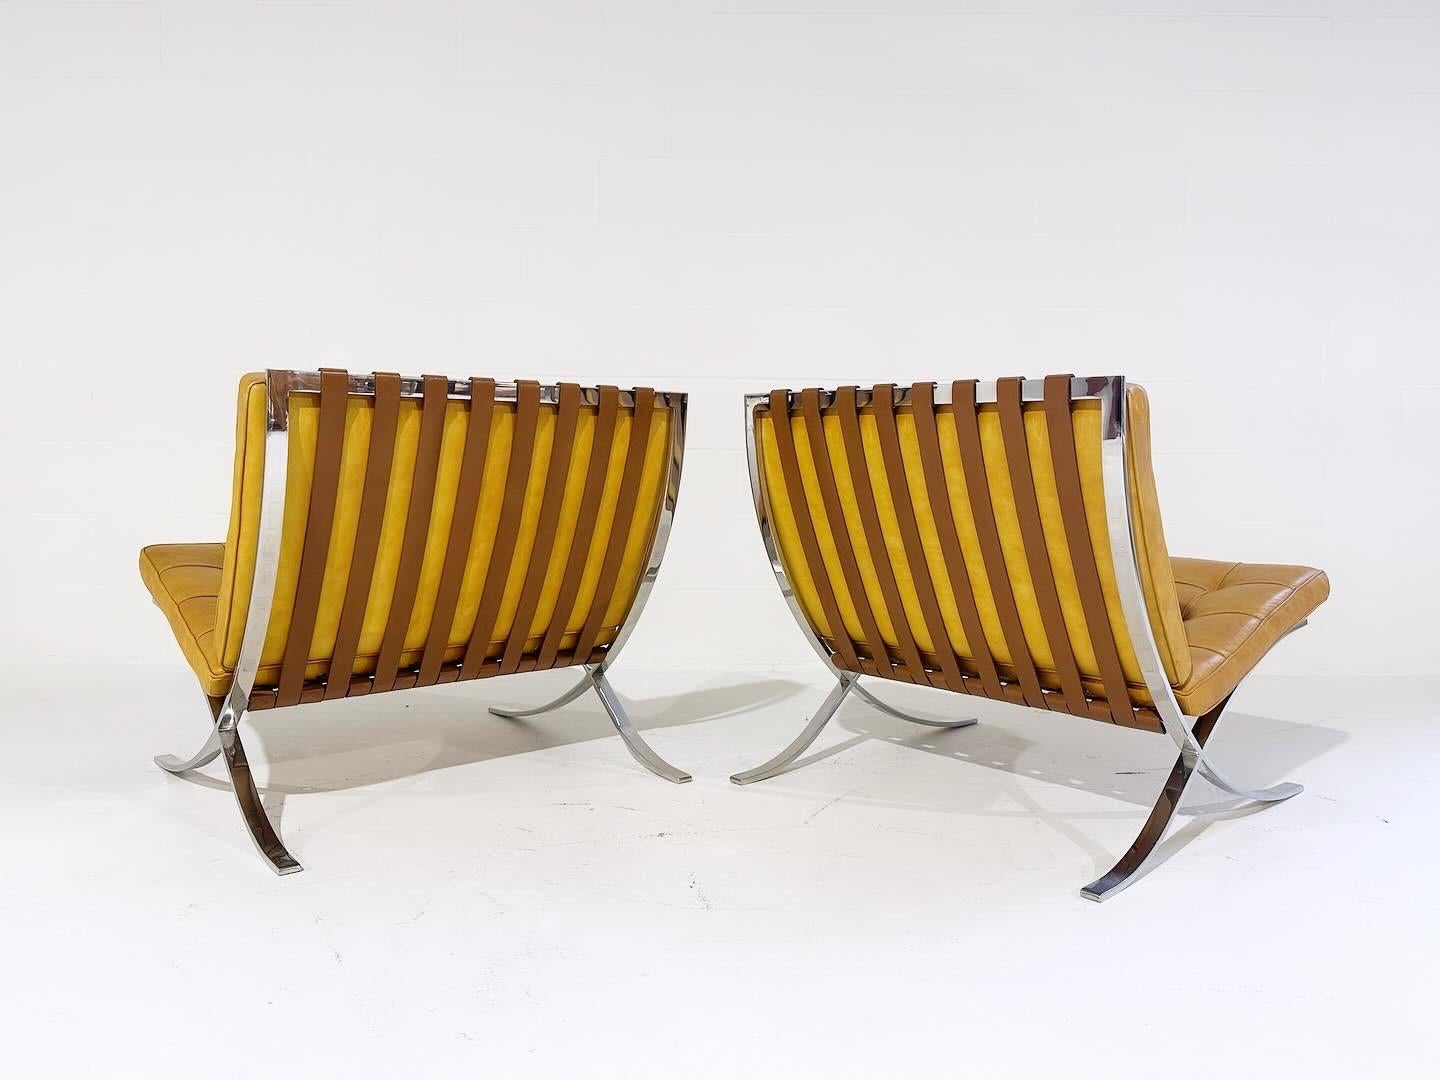 A collector's pair. This stunning pair of Barcelona chairs with ottomans were made by Gerald R. Griffith under the close supervision of Mies van der Rohe. The Griffith chairs have extremely precise corners and less reinforcement at the central cross